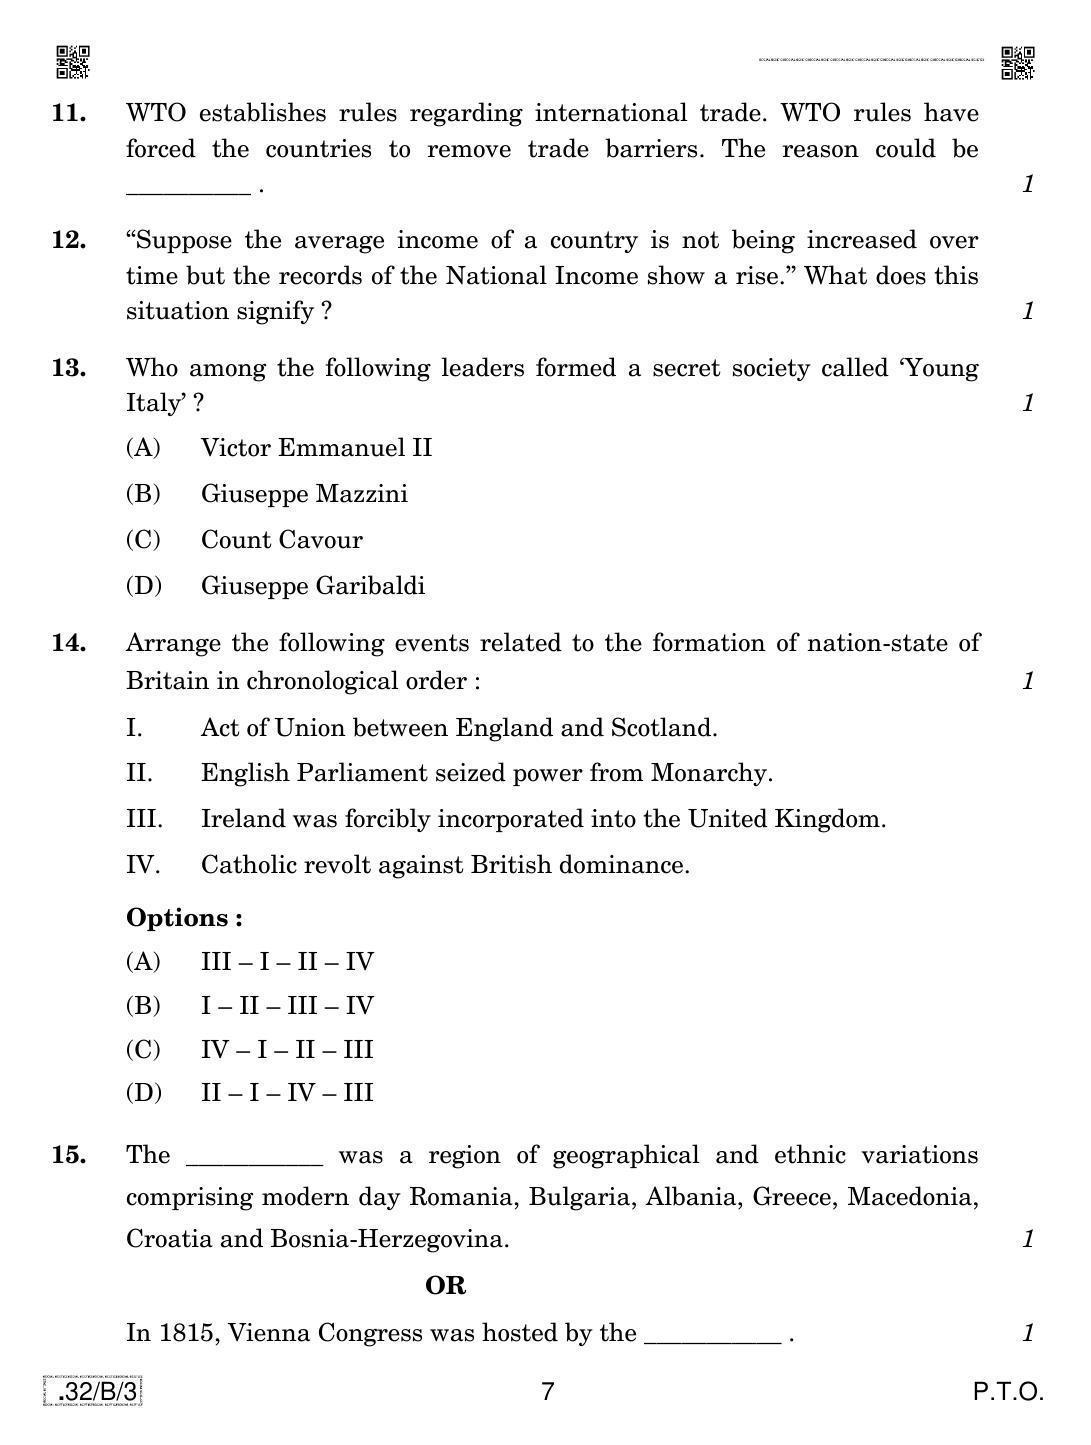 CBSE Class 10 32-C-3 Social Science 2020 Compartment Question Paper - Page 7